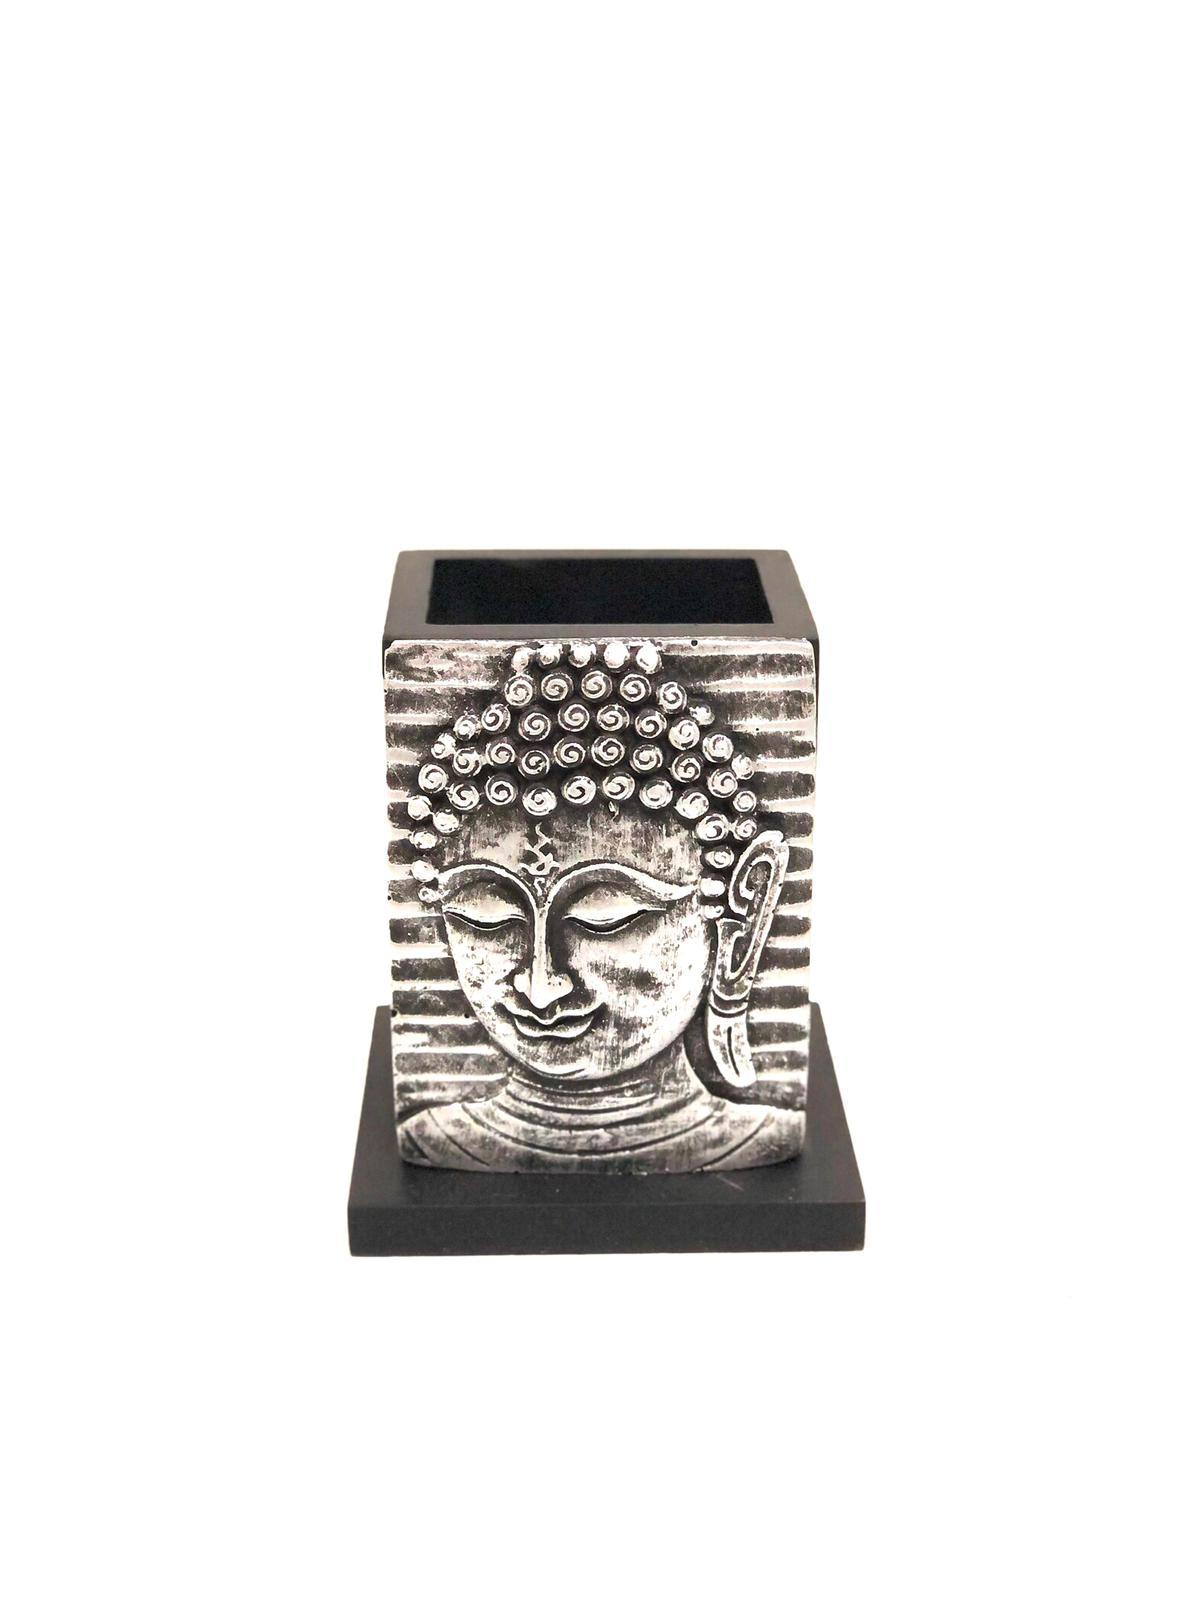 Buddha Face Pen Stand Resin Wooden Combo Stationary Desk By Tamrapatra